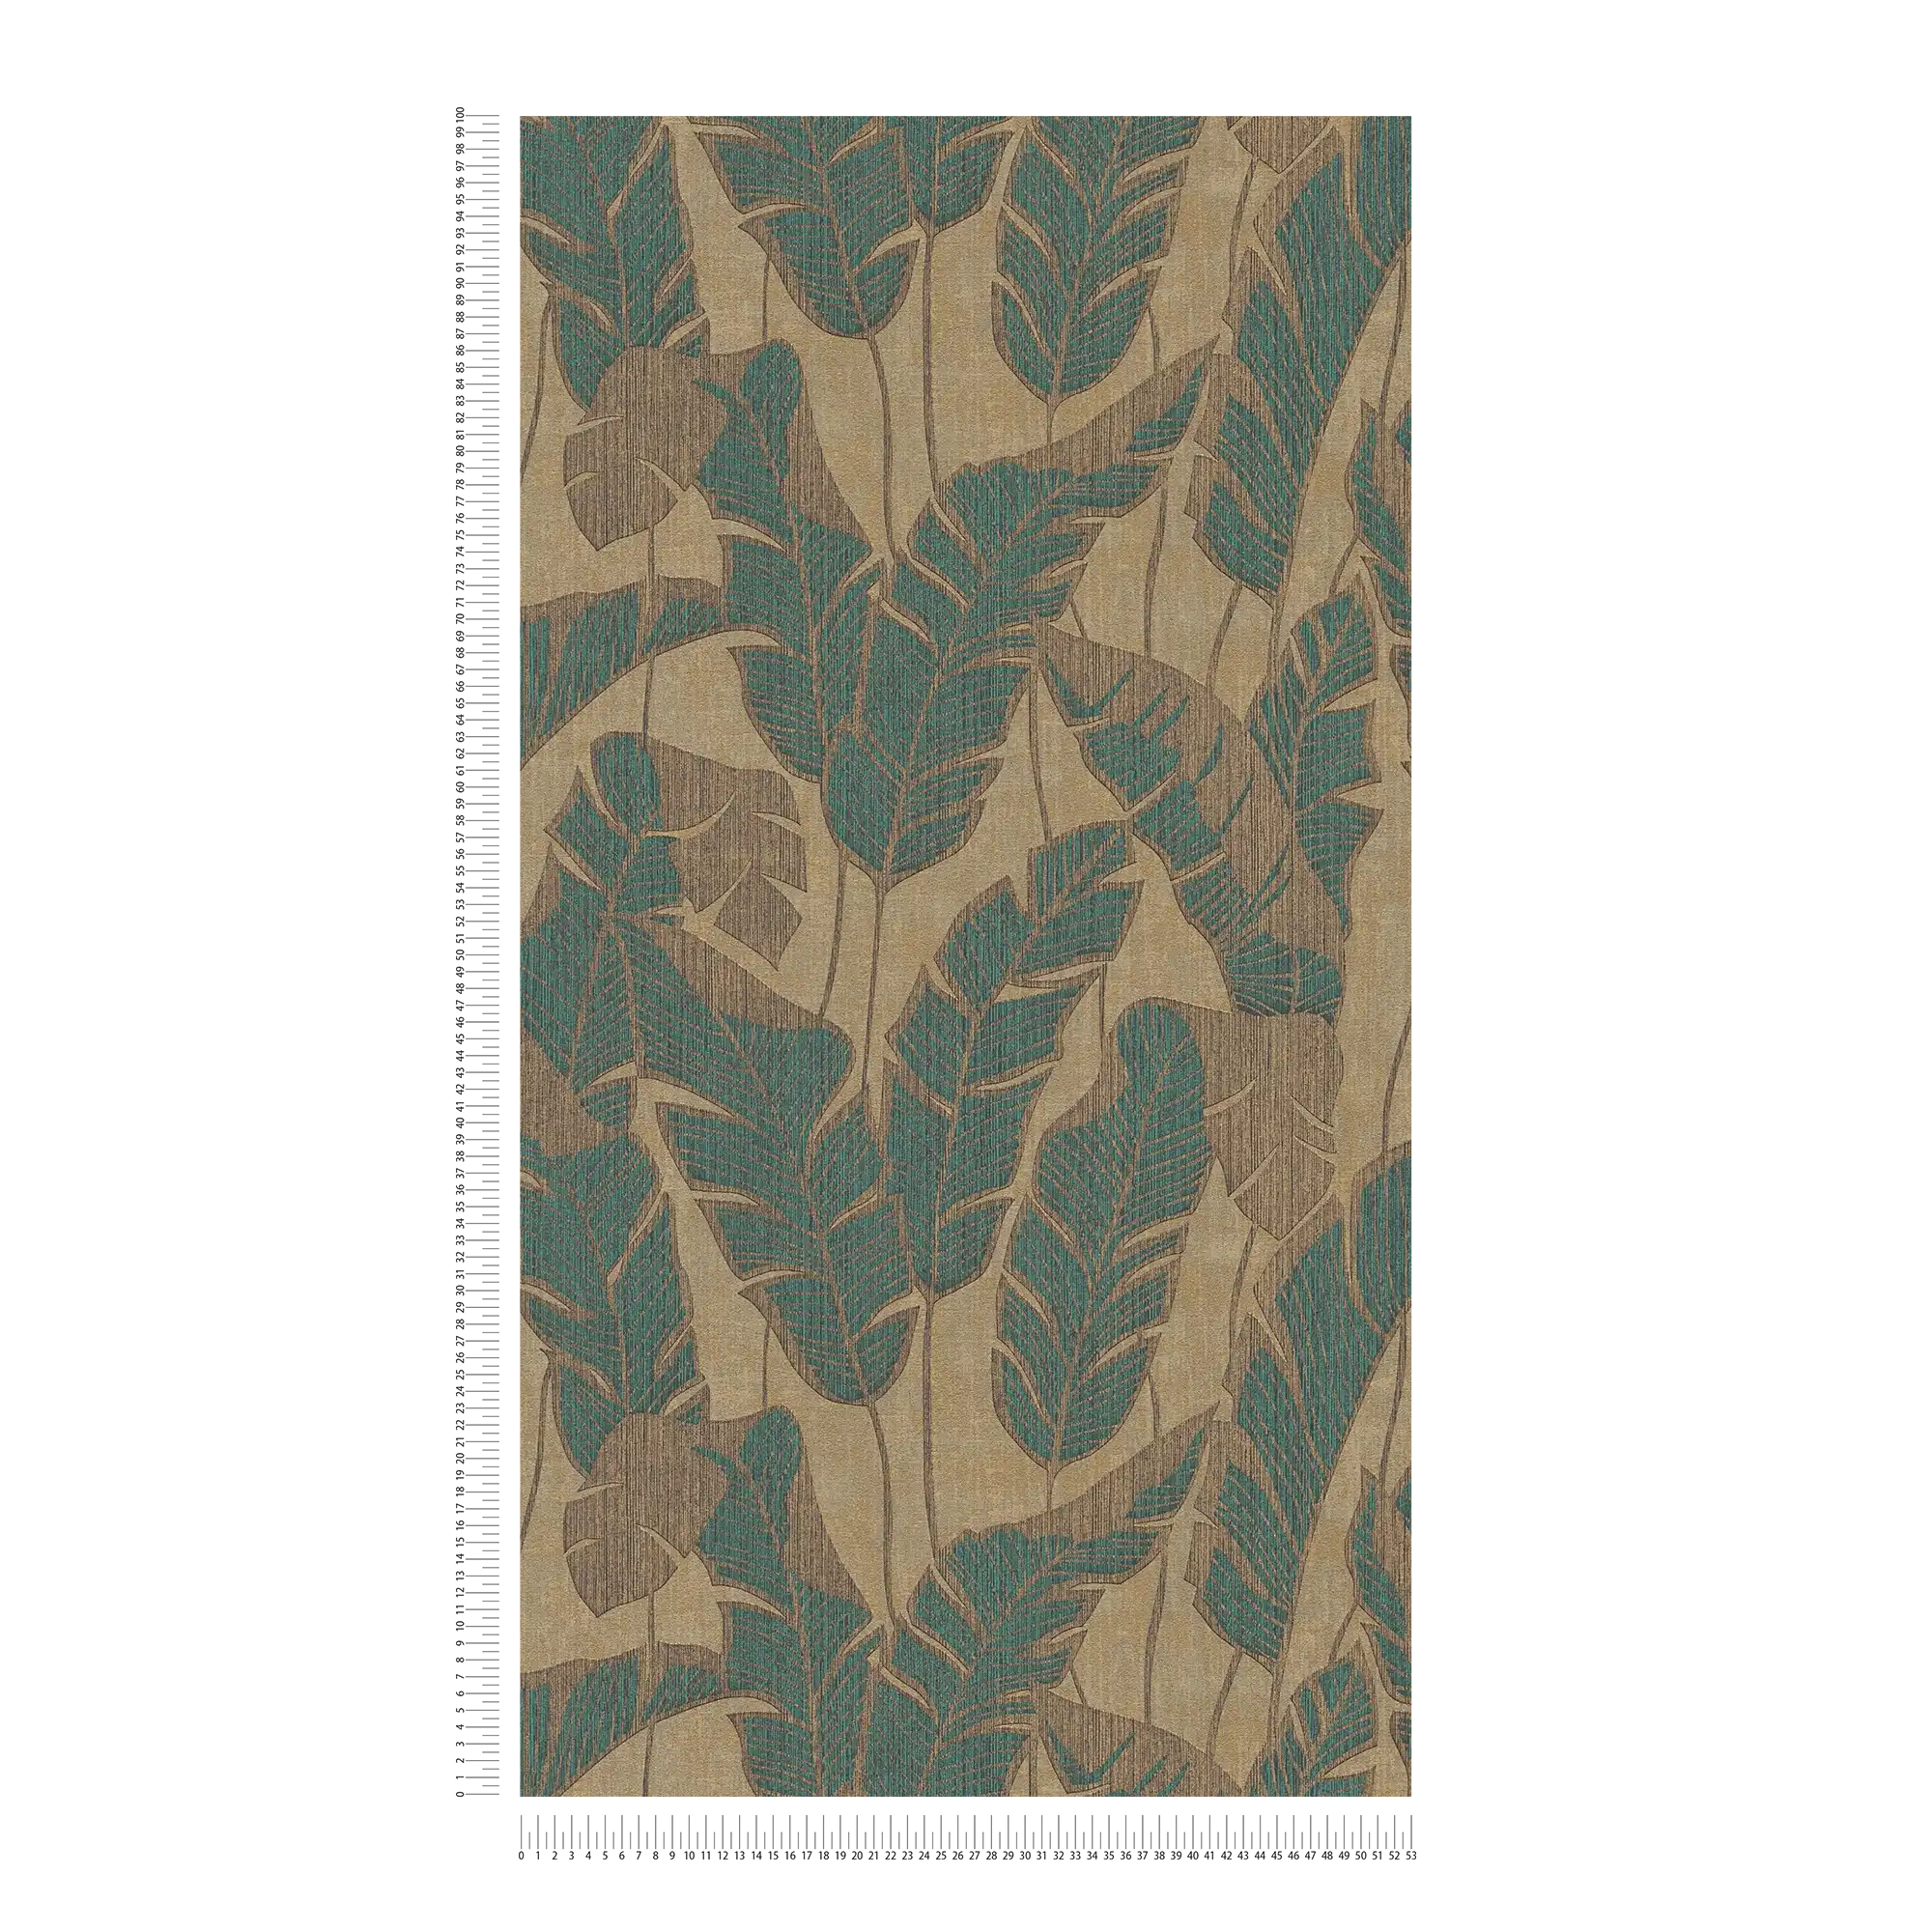             Wallpaper with floral pattern - beige, green, black
        